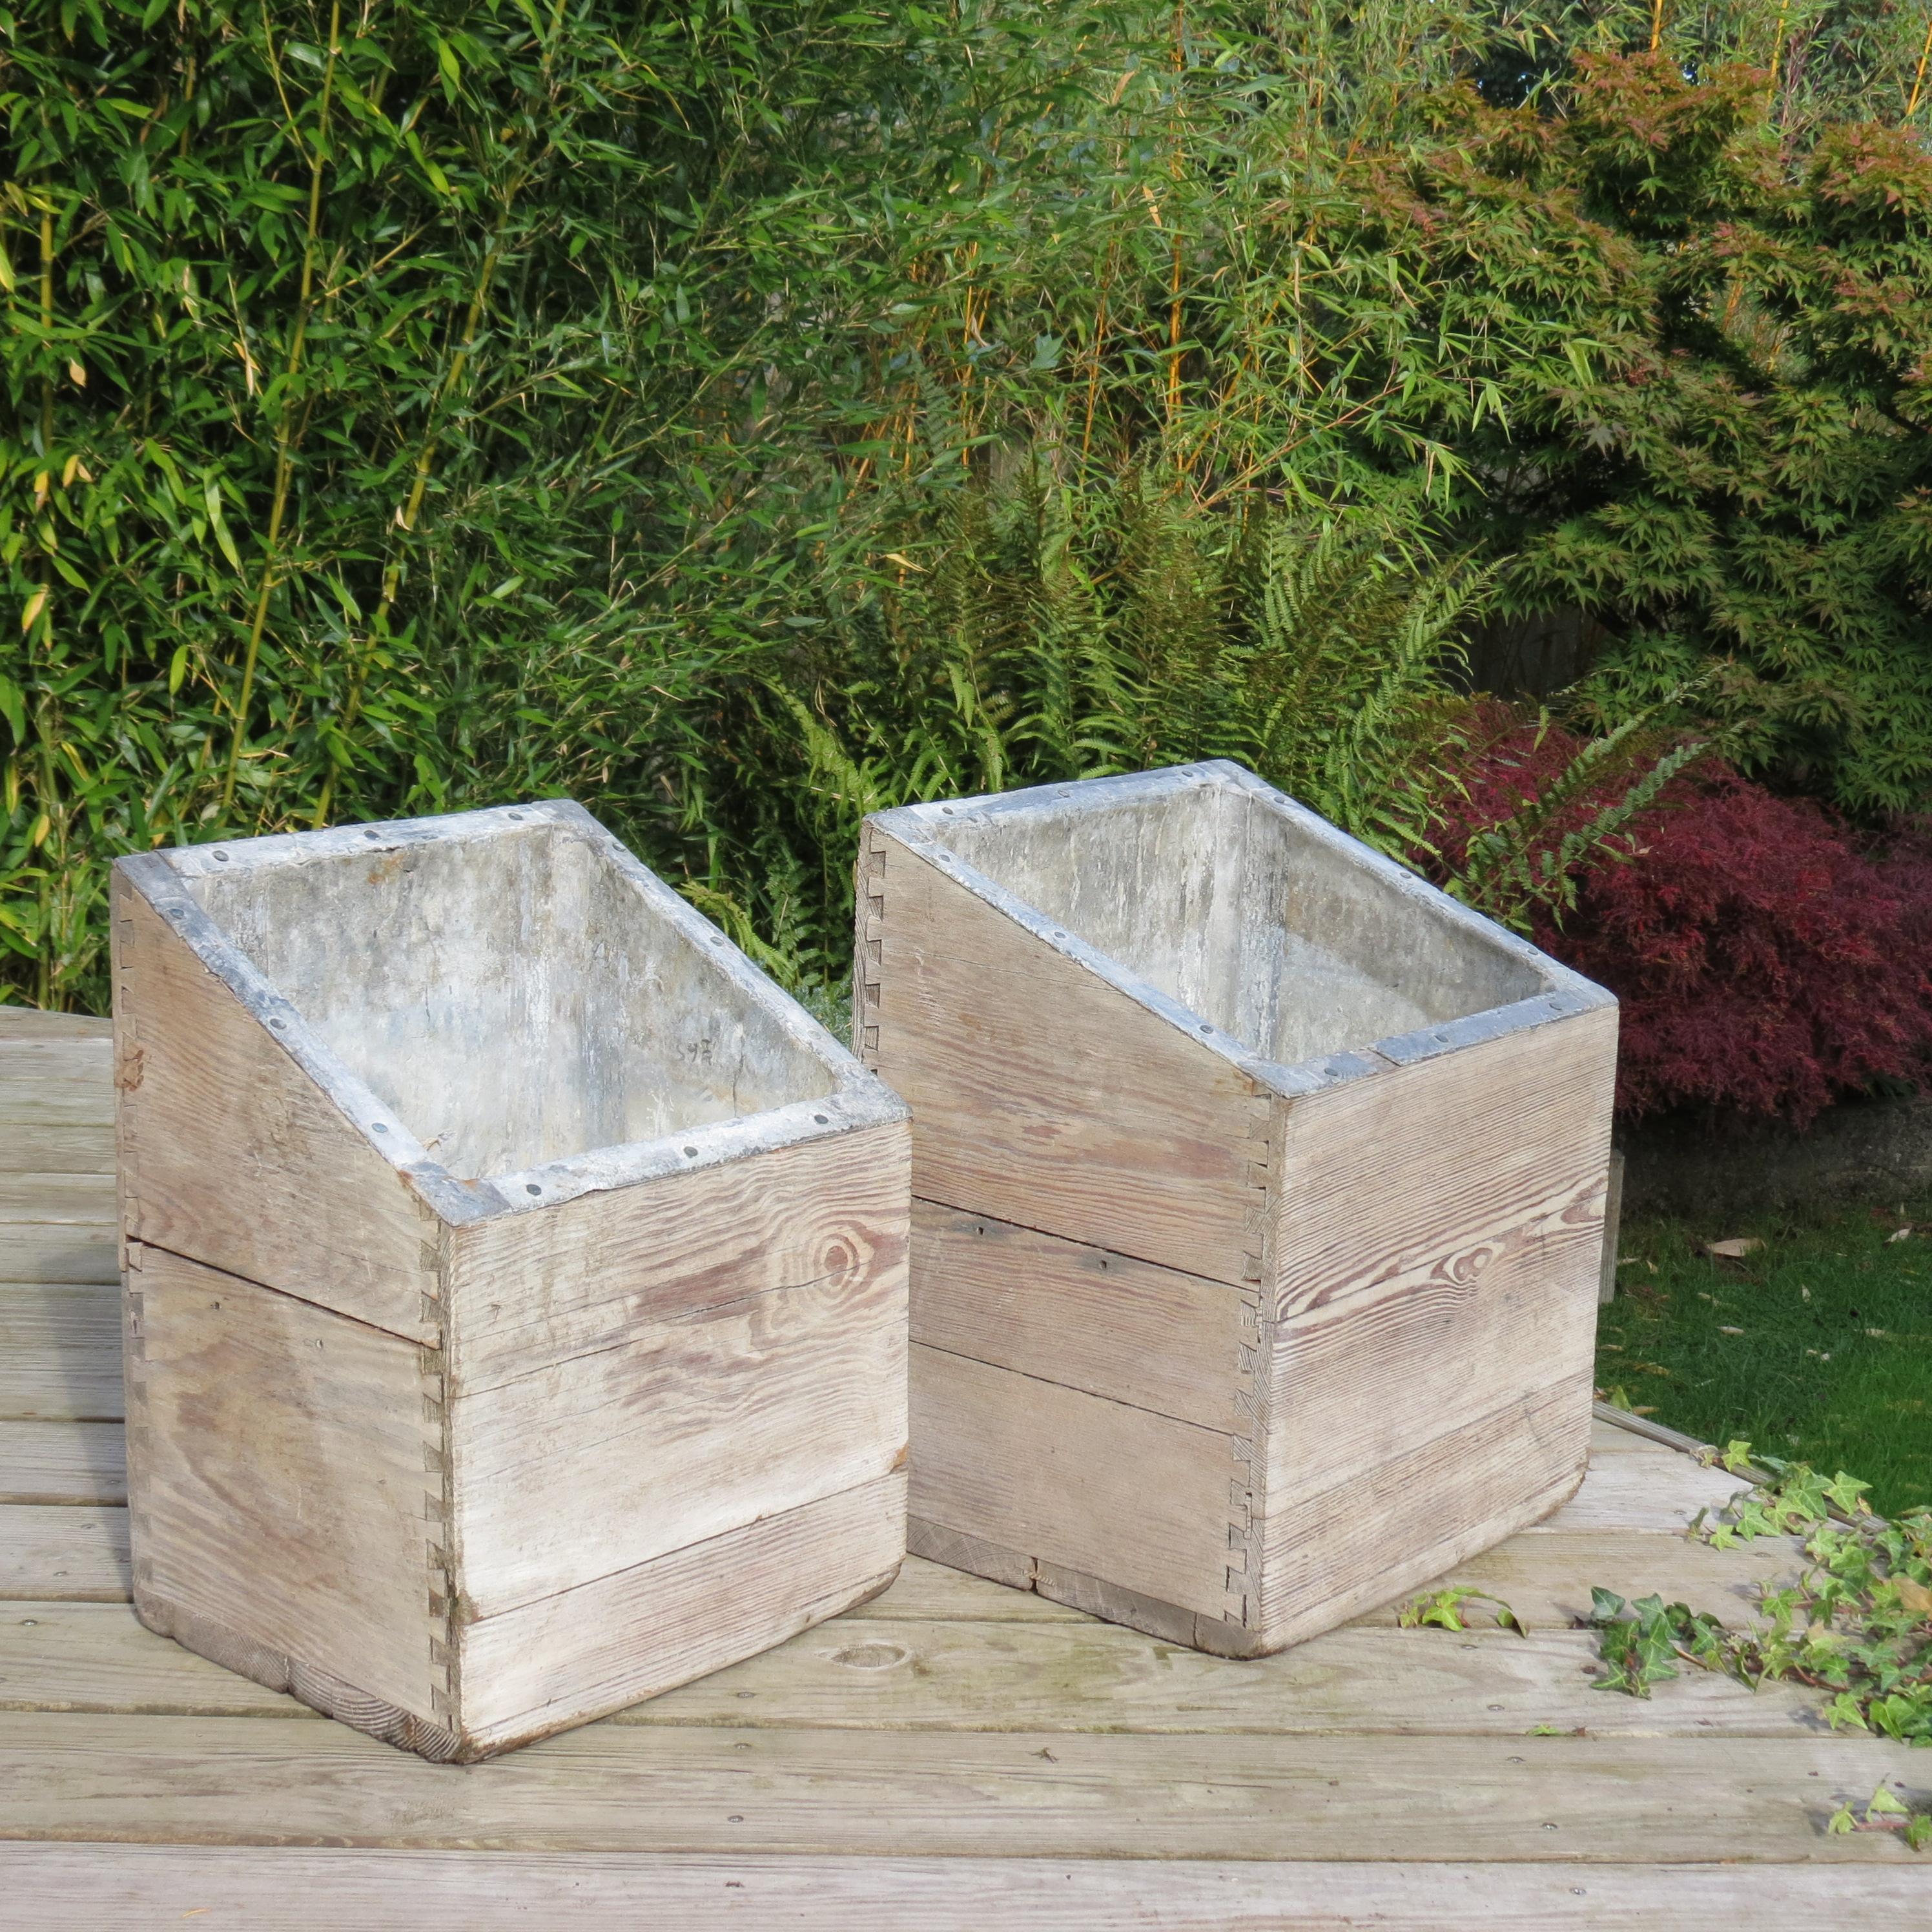 Wonderful pair of vintage handmade planters. Solid Douglas Fir Pine with dovetail corner joints, lead lined, probably originally produced for holding ice for use in a kitchen. Date from the late 19th Century. Would now make wonderful plant holders.